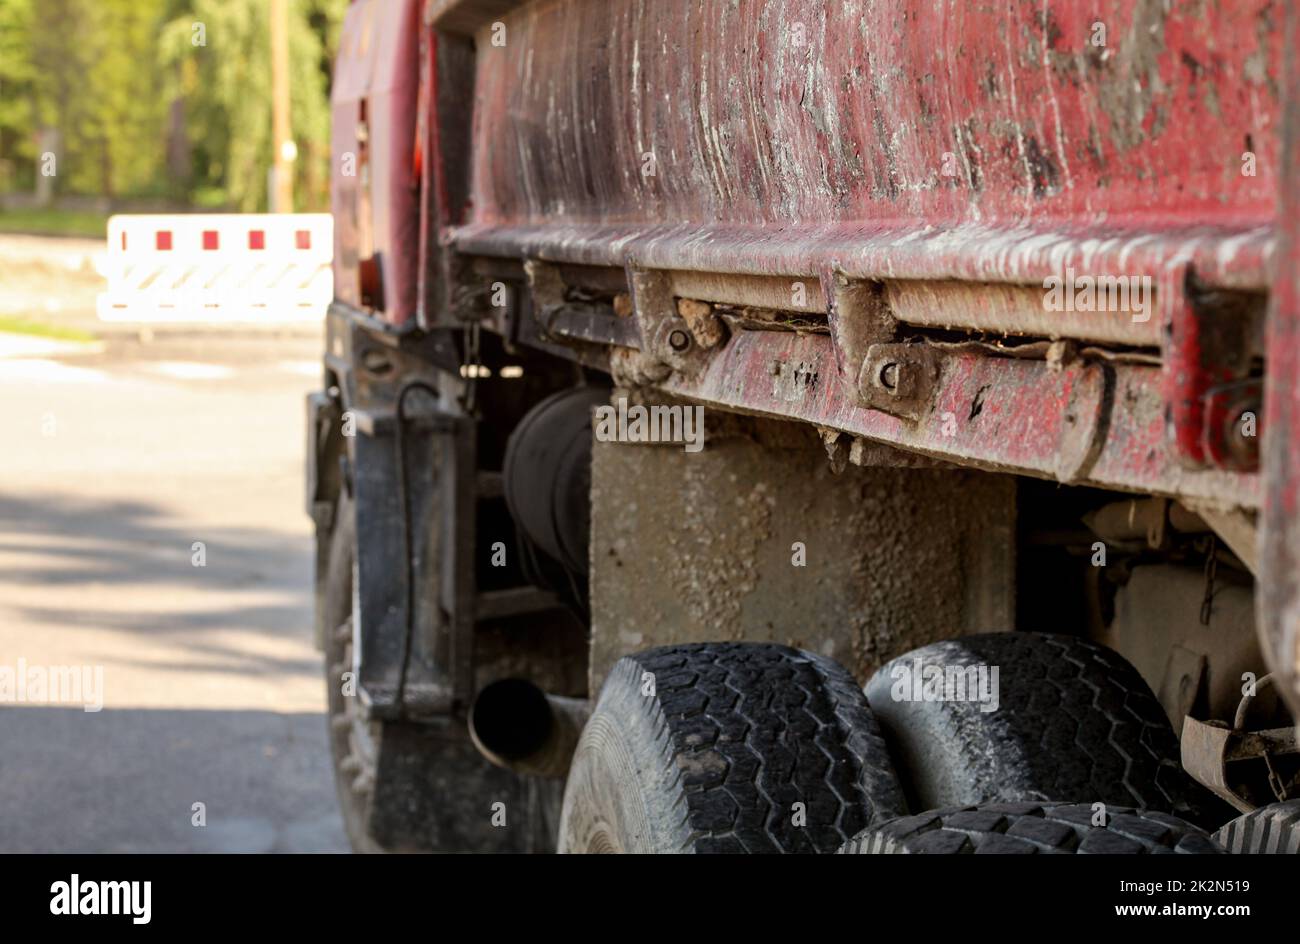 Closeup of old rusty and dirty truck side,  paint peeling on cargo area wall, large tires visible, blurred road block sign id distance. Roadworks illustration. Stock Photo